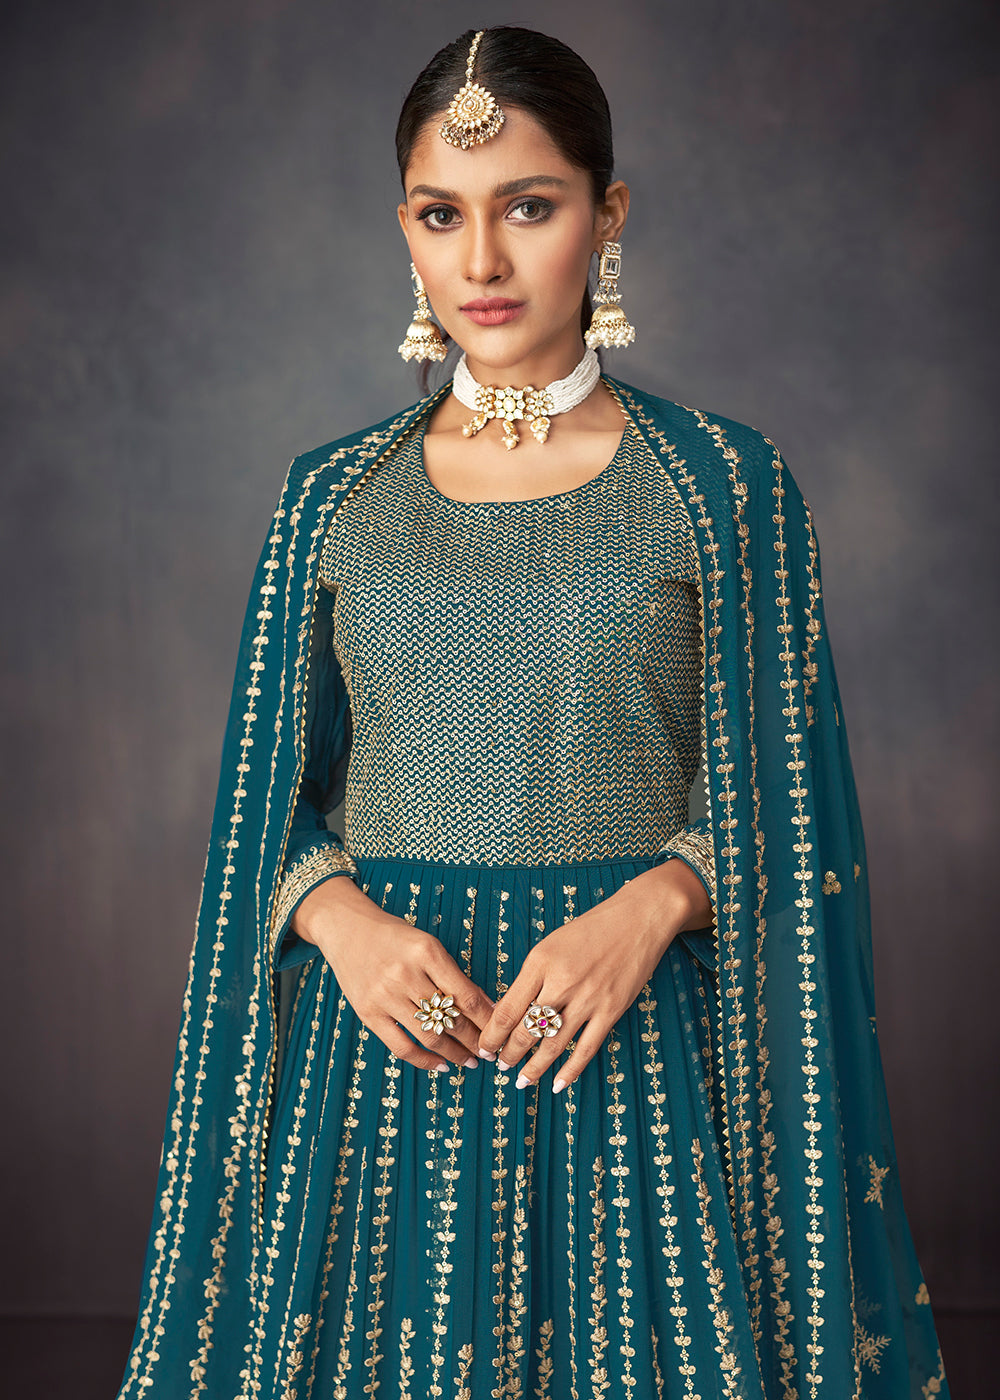 Shop Now Prussian Blue Georgette Embellished Festive Sharara Suit Online at Empress Clothing in USA, UK, Canada & Worldwide.